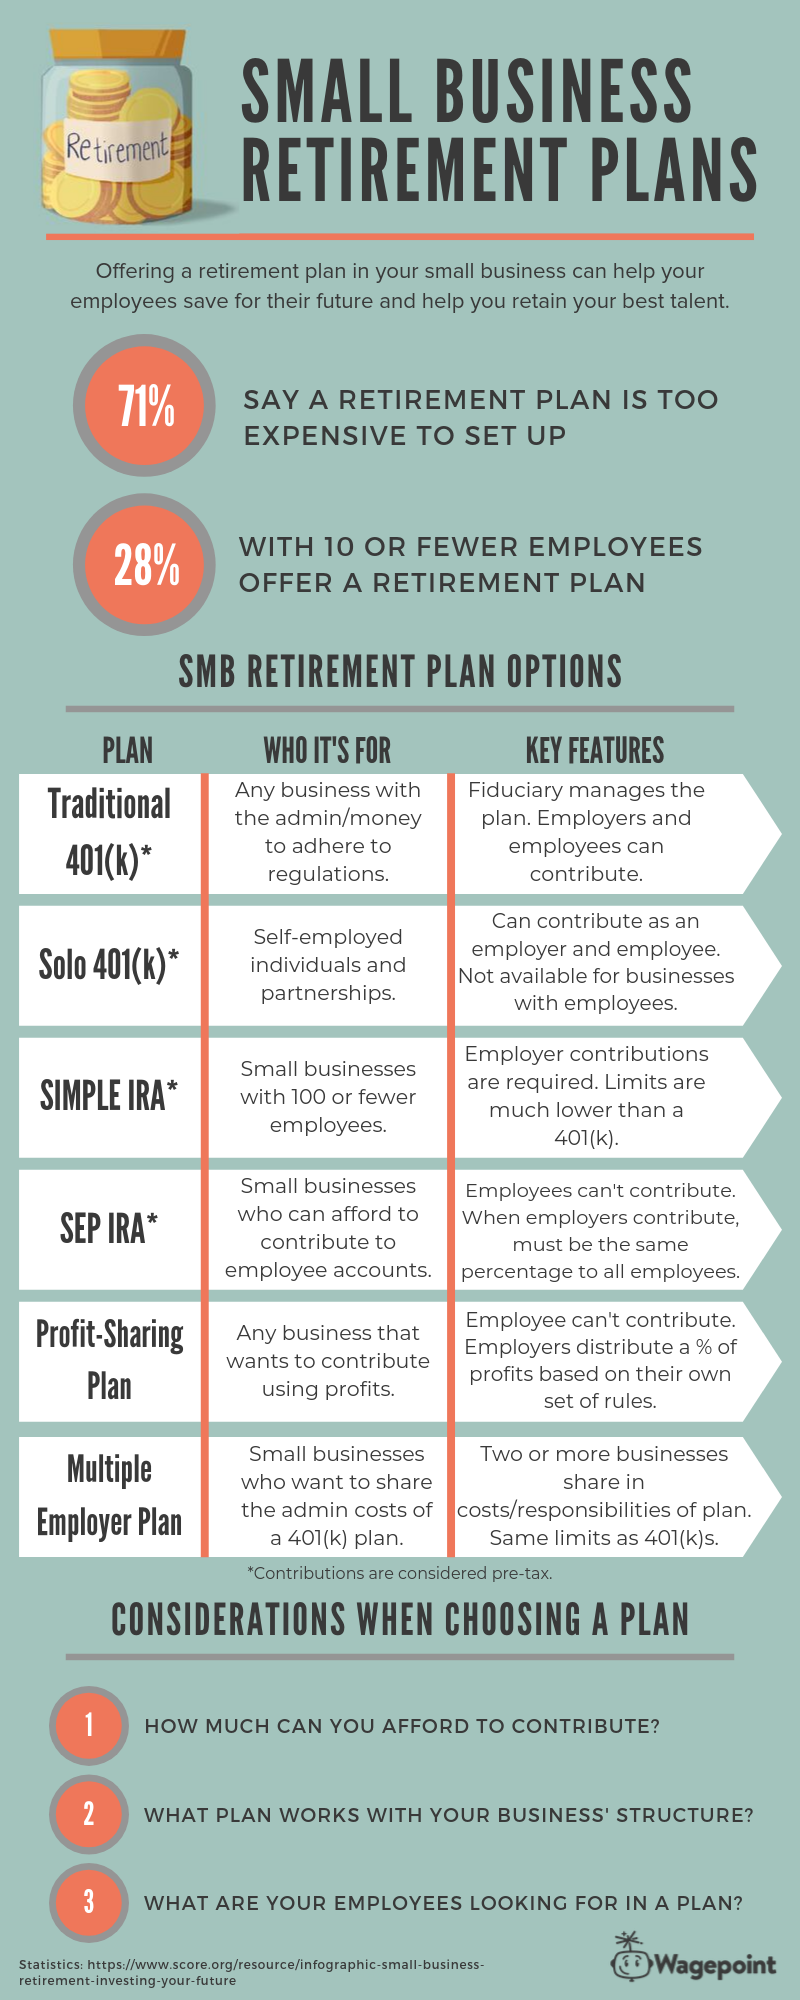 types of retirement plans for small business owners